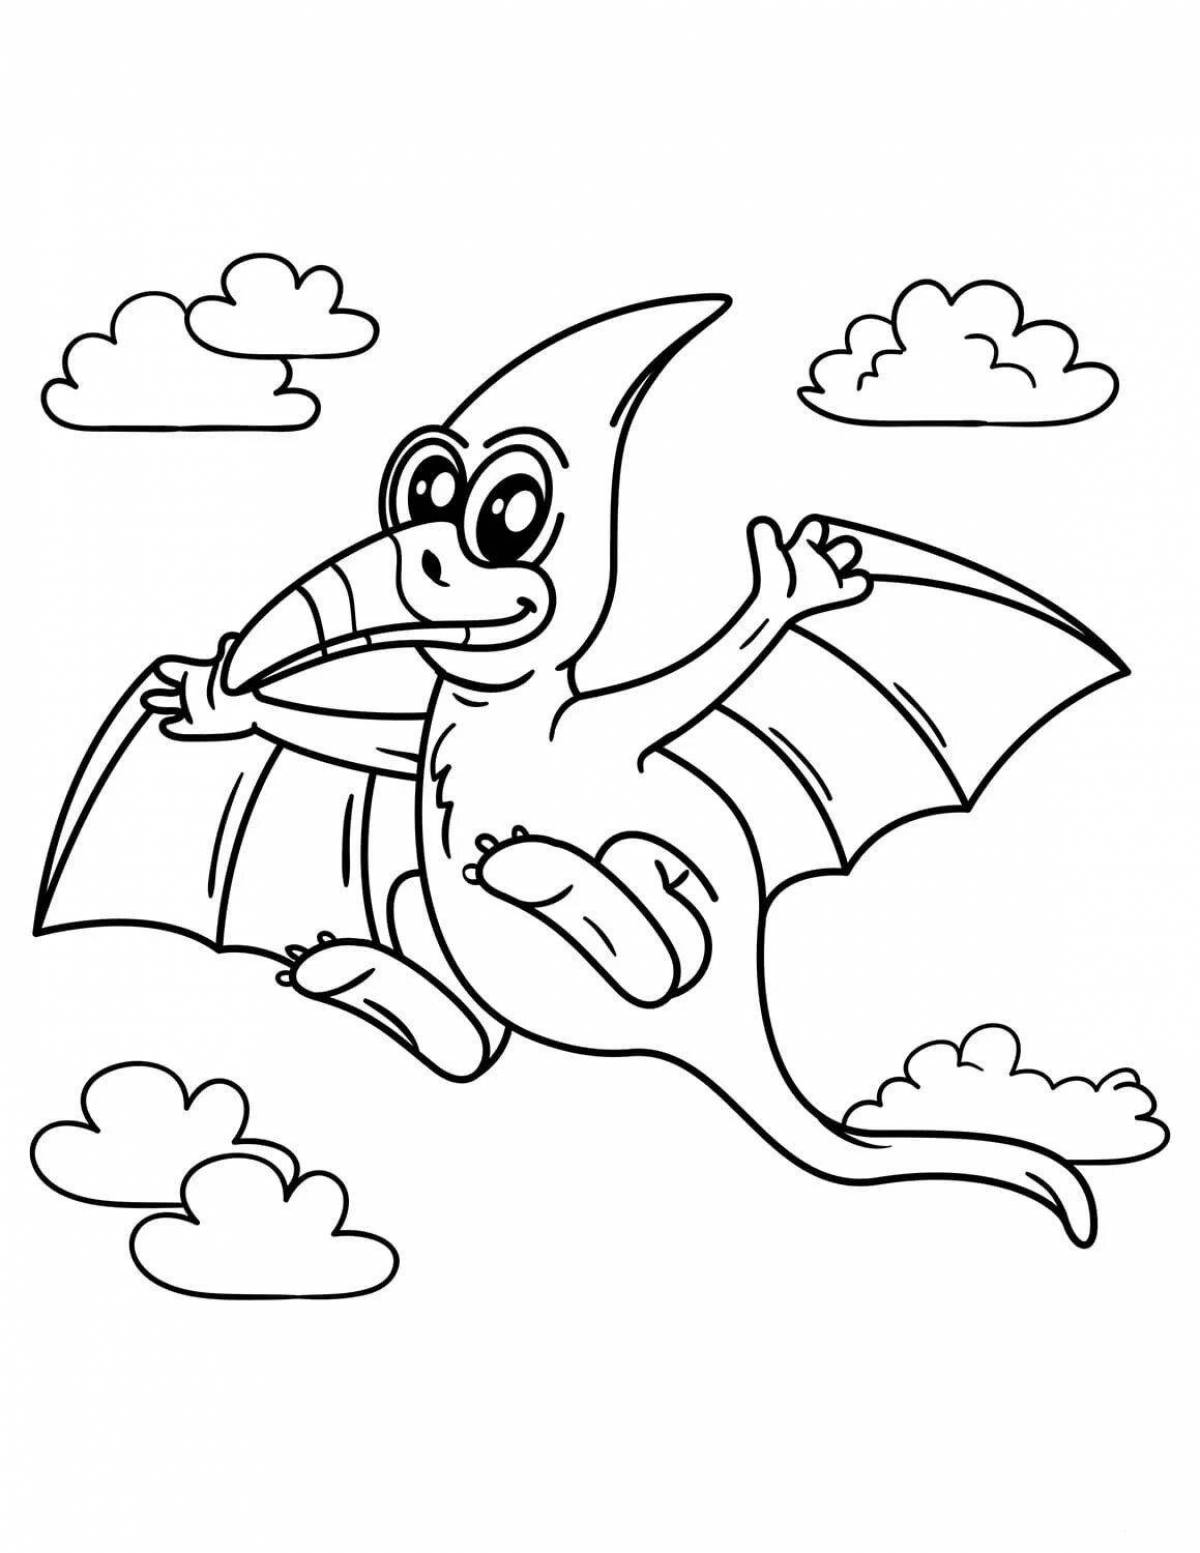 Coloring page dazzling pterodactyl